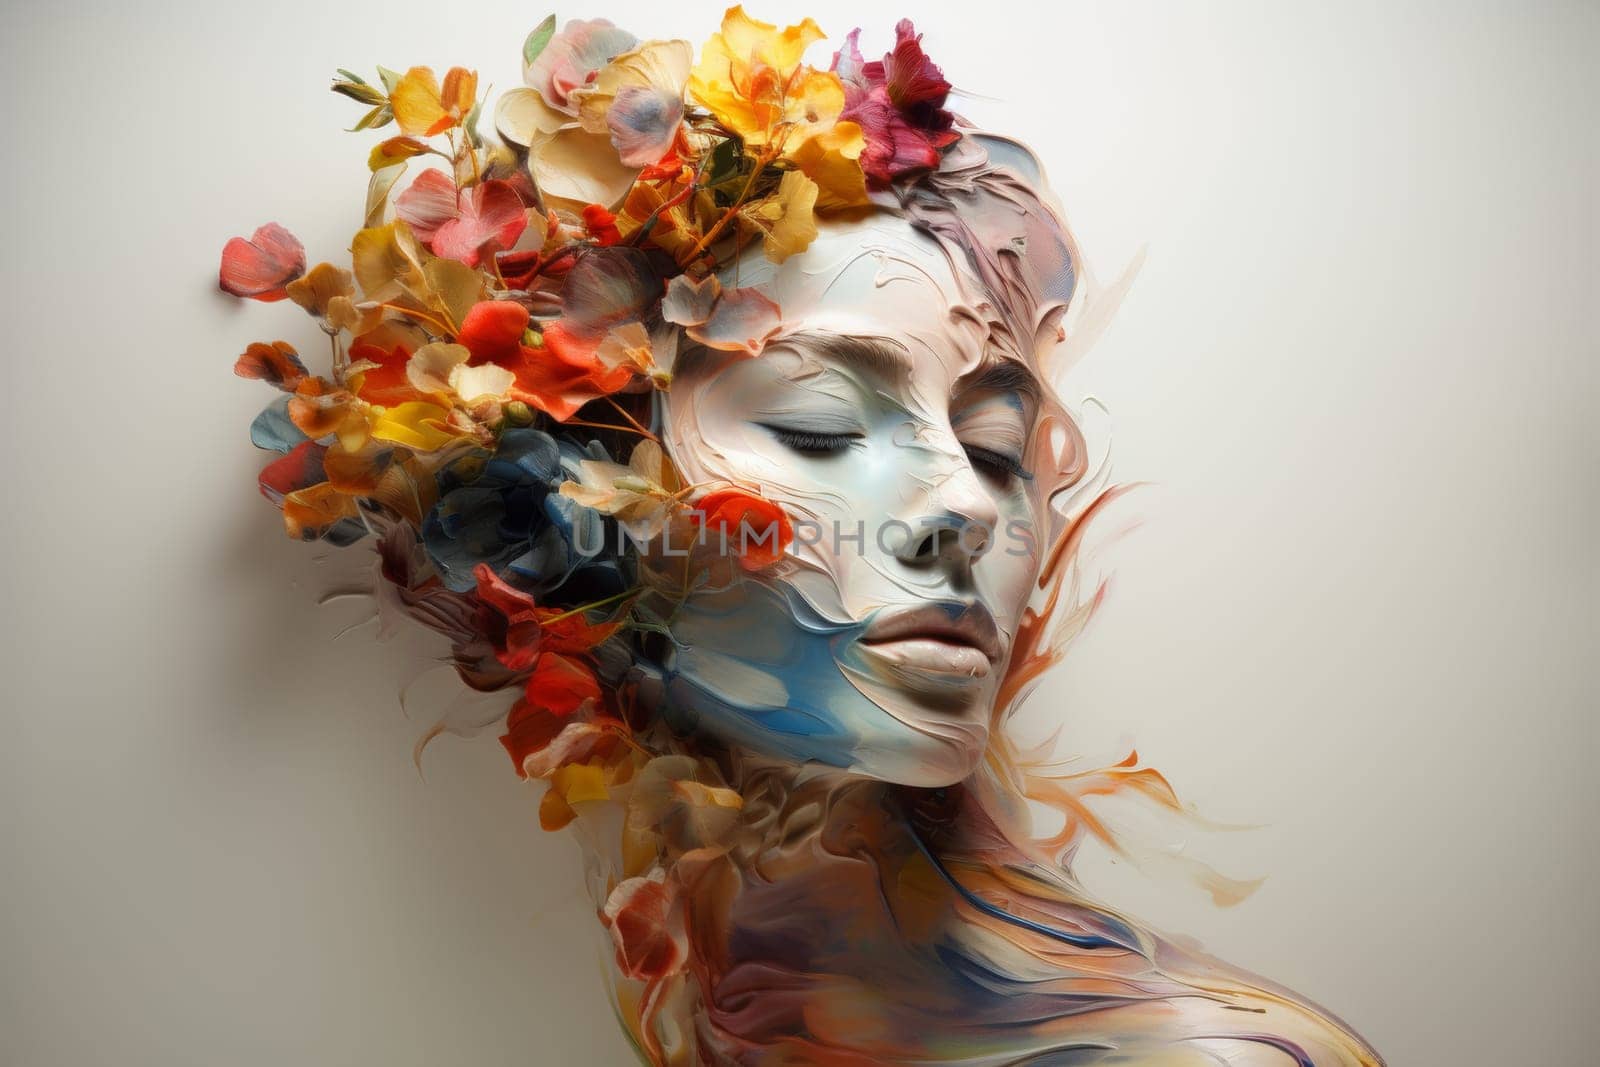 Artistic double exposure of woman with beautiful spring flowers superimposed on her face